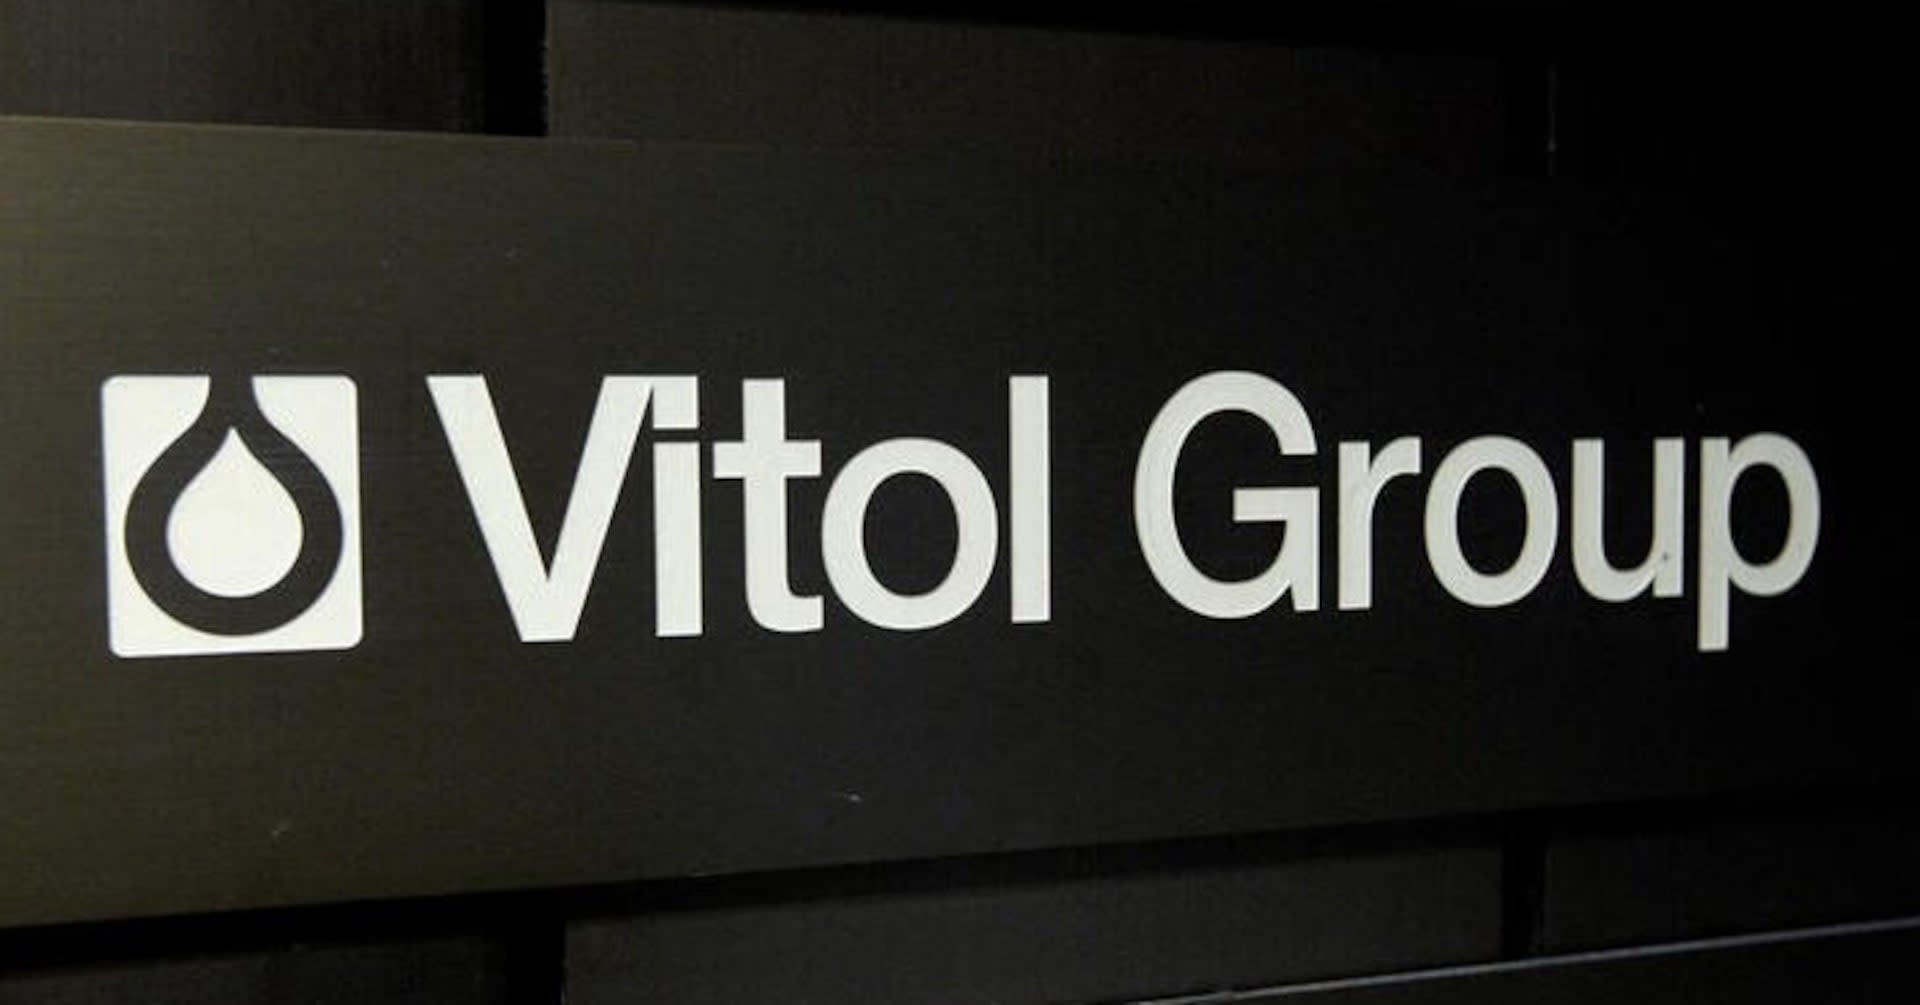 Gas traders Vitol, SK to pay $50 mln to resolve California lawsuit